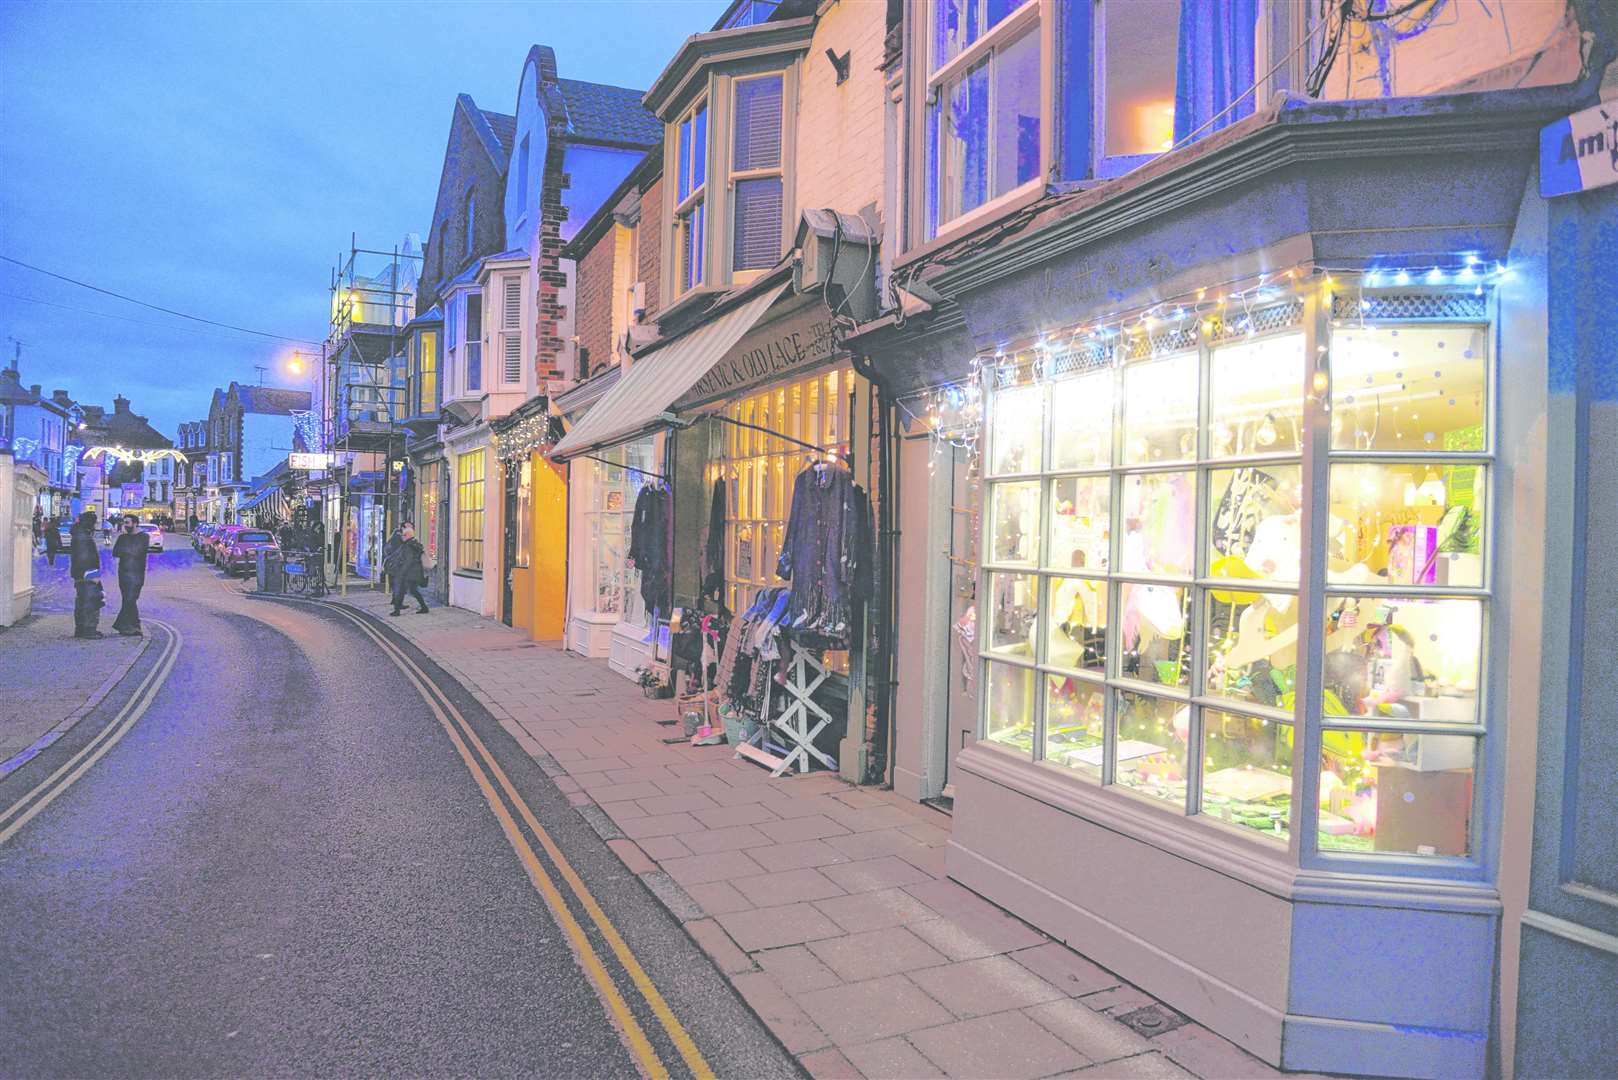 More independent stores are moving into the high street as it evolves due to changing shopping habits